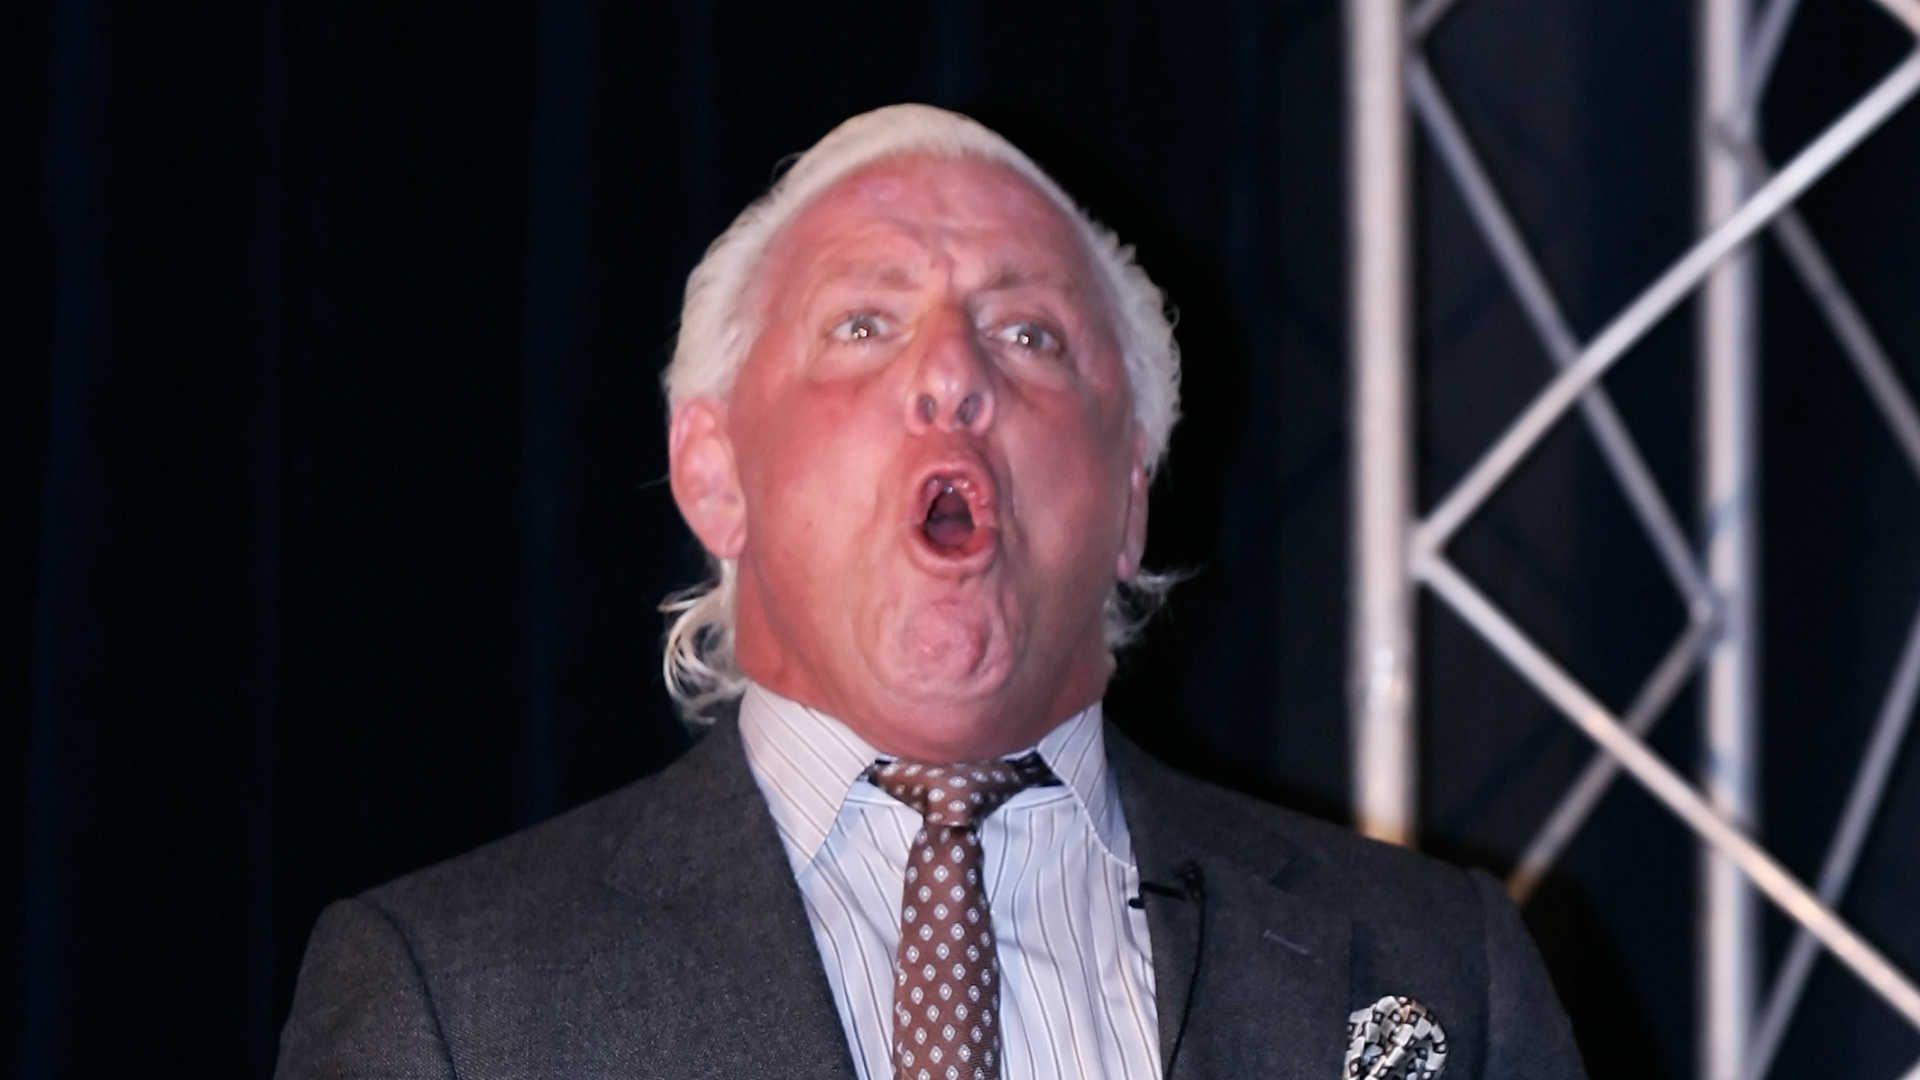 Woo! Watch Ric Flair, deadlift 400 pounds. Other Sports